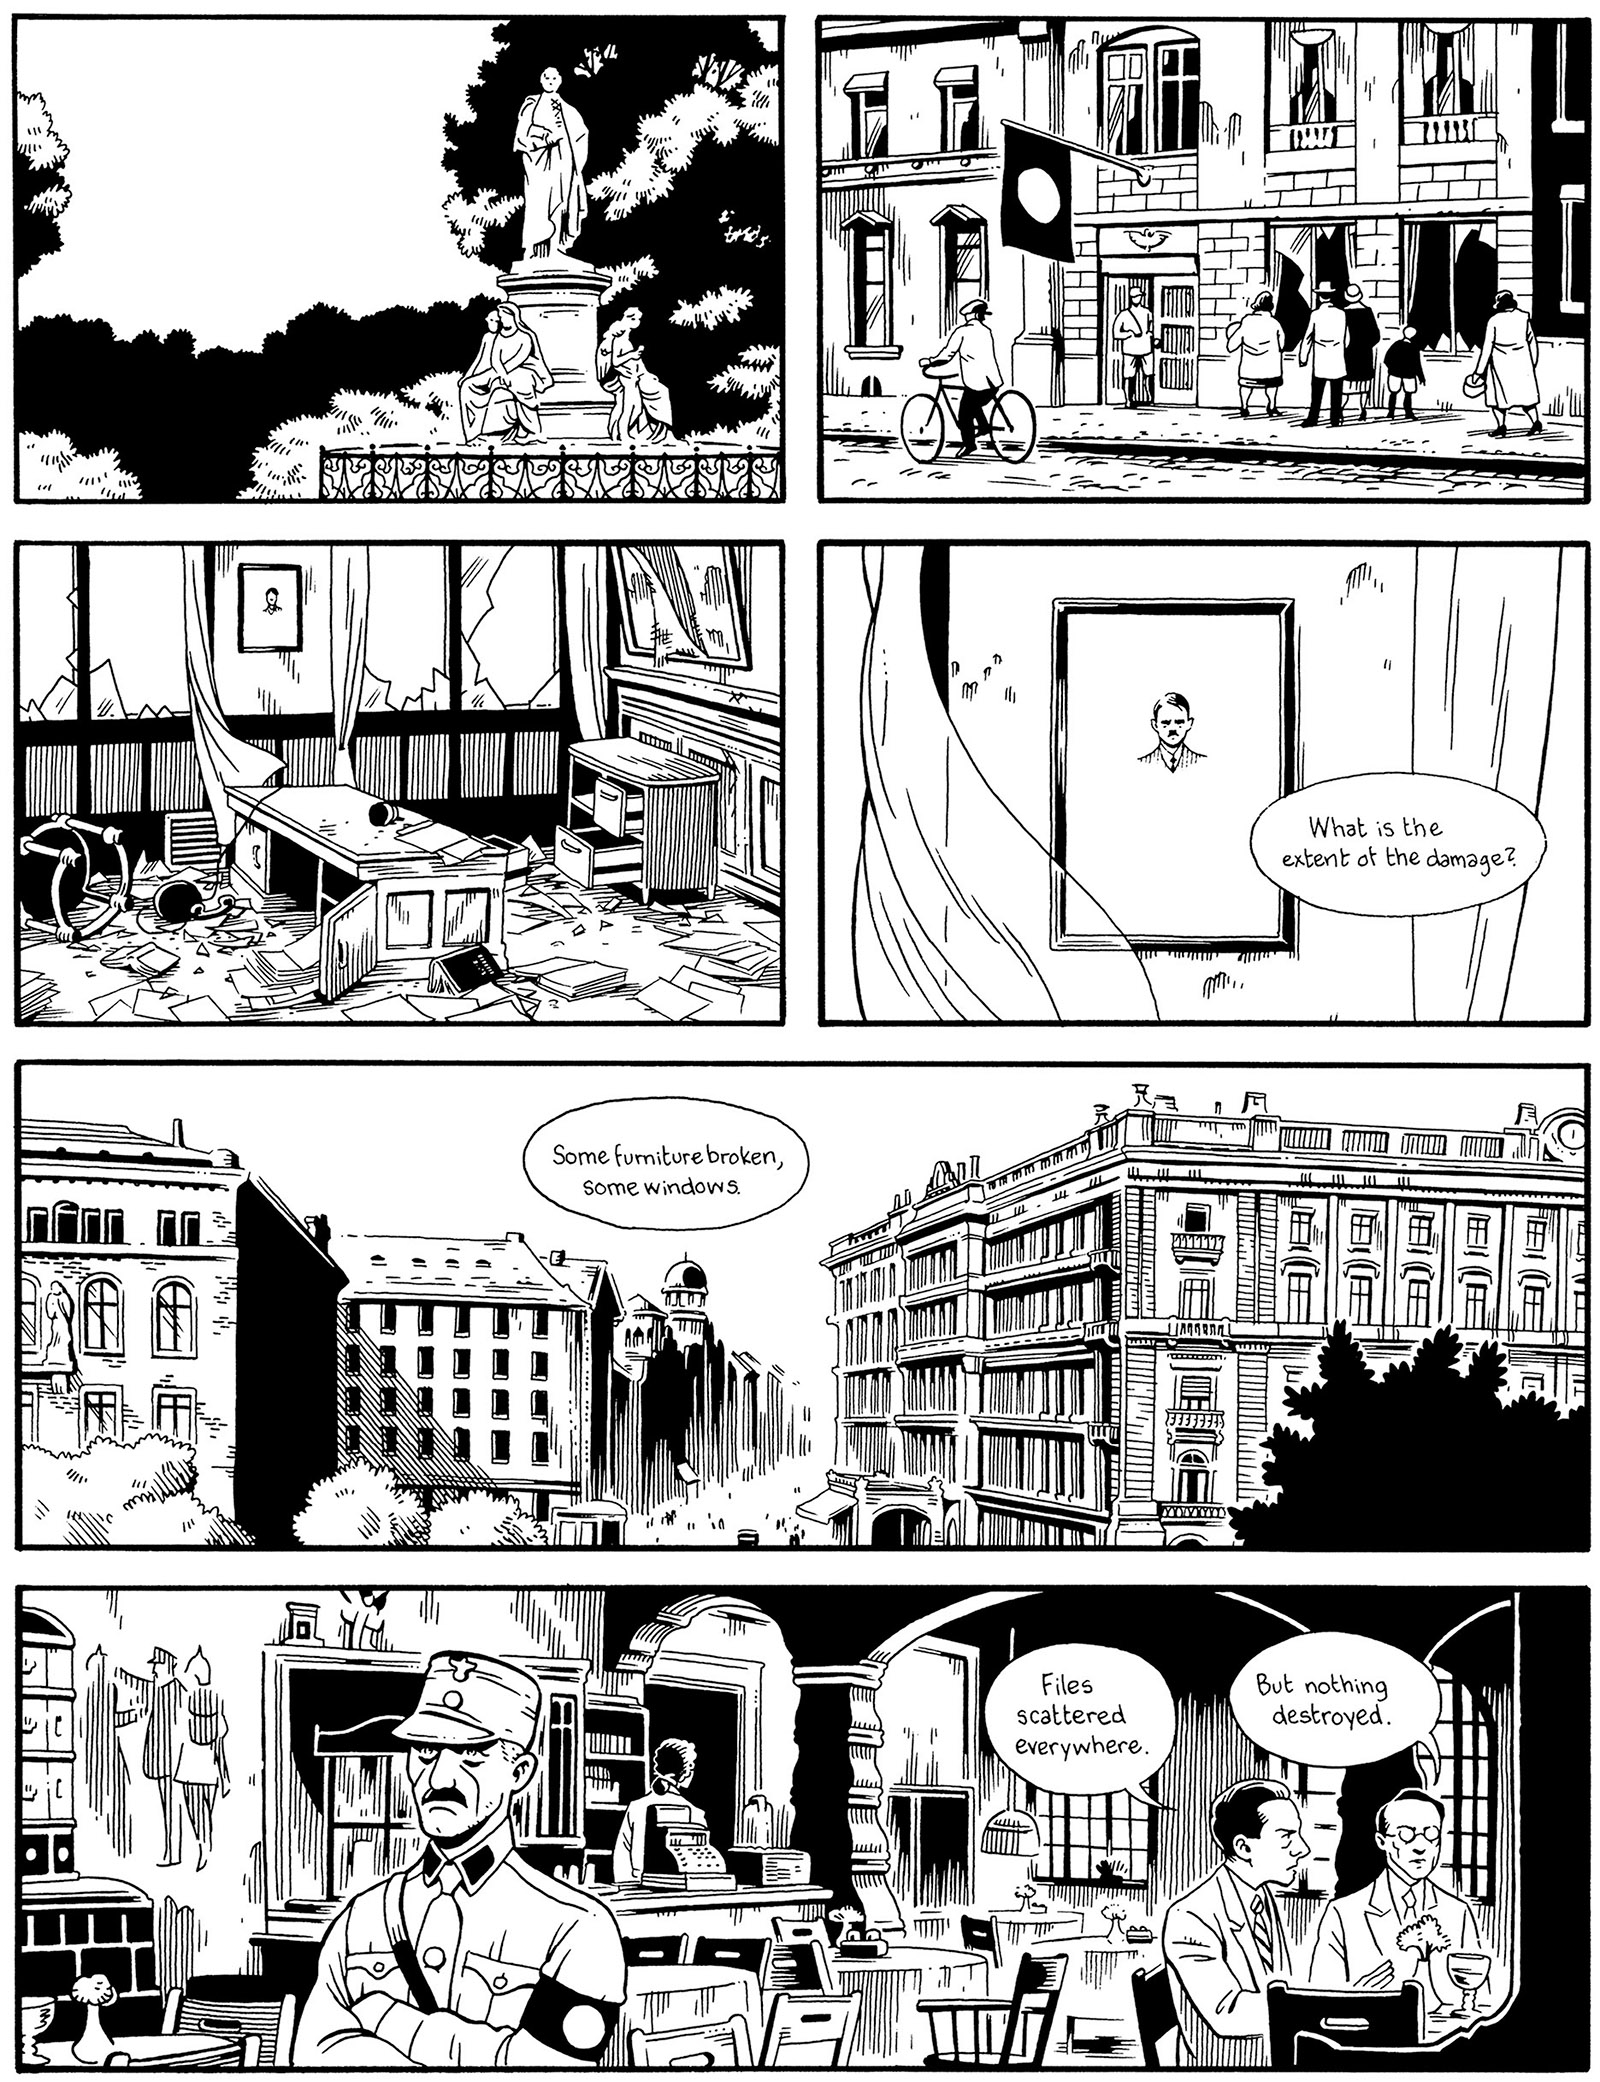 A page from the graphic novel Berlin by Jason Lutes